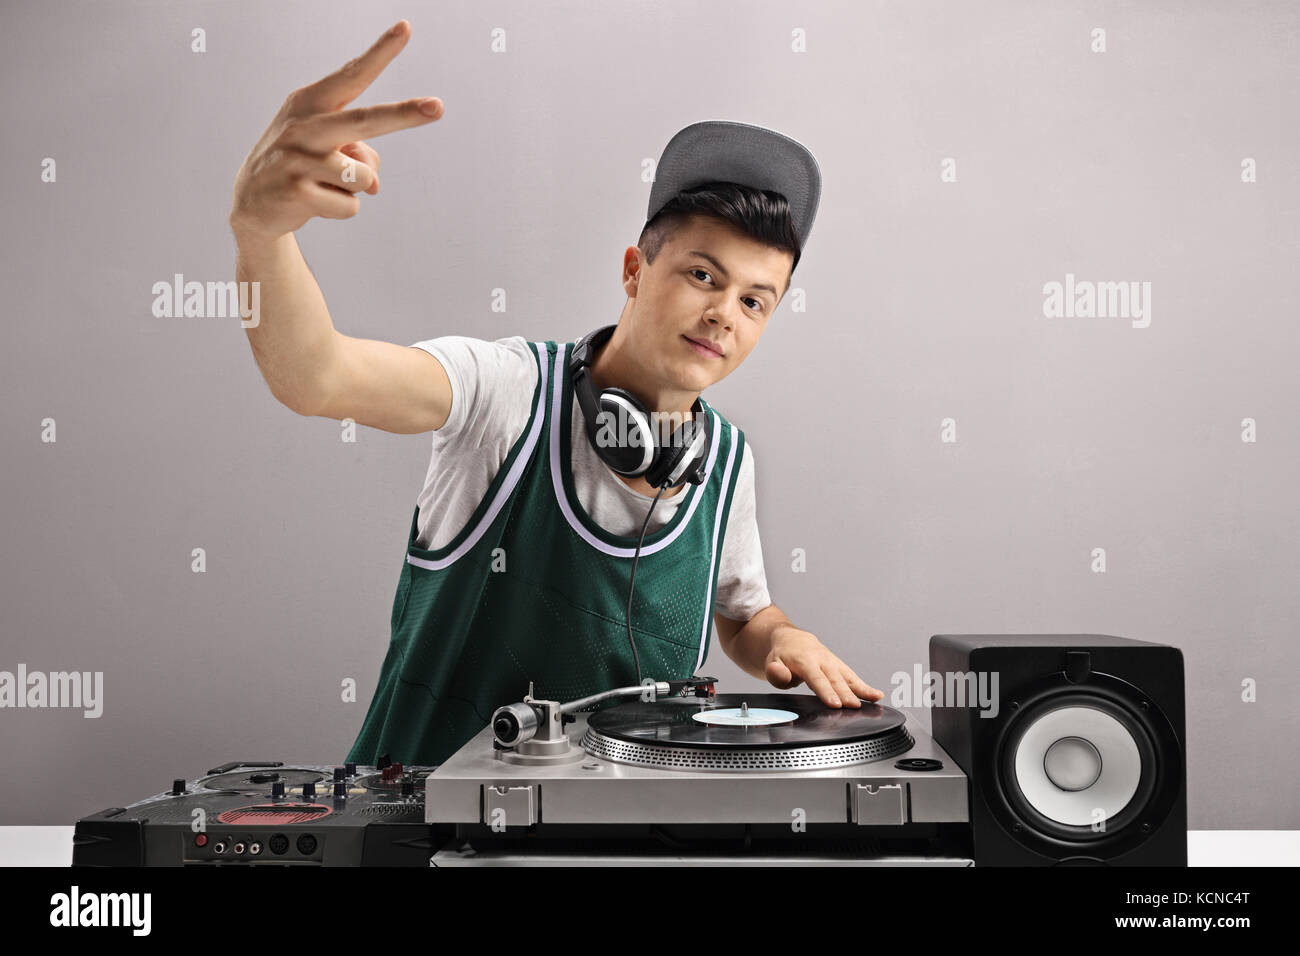 Teenage DJ making a peace sign against a gray wall Stock Photo